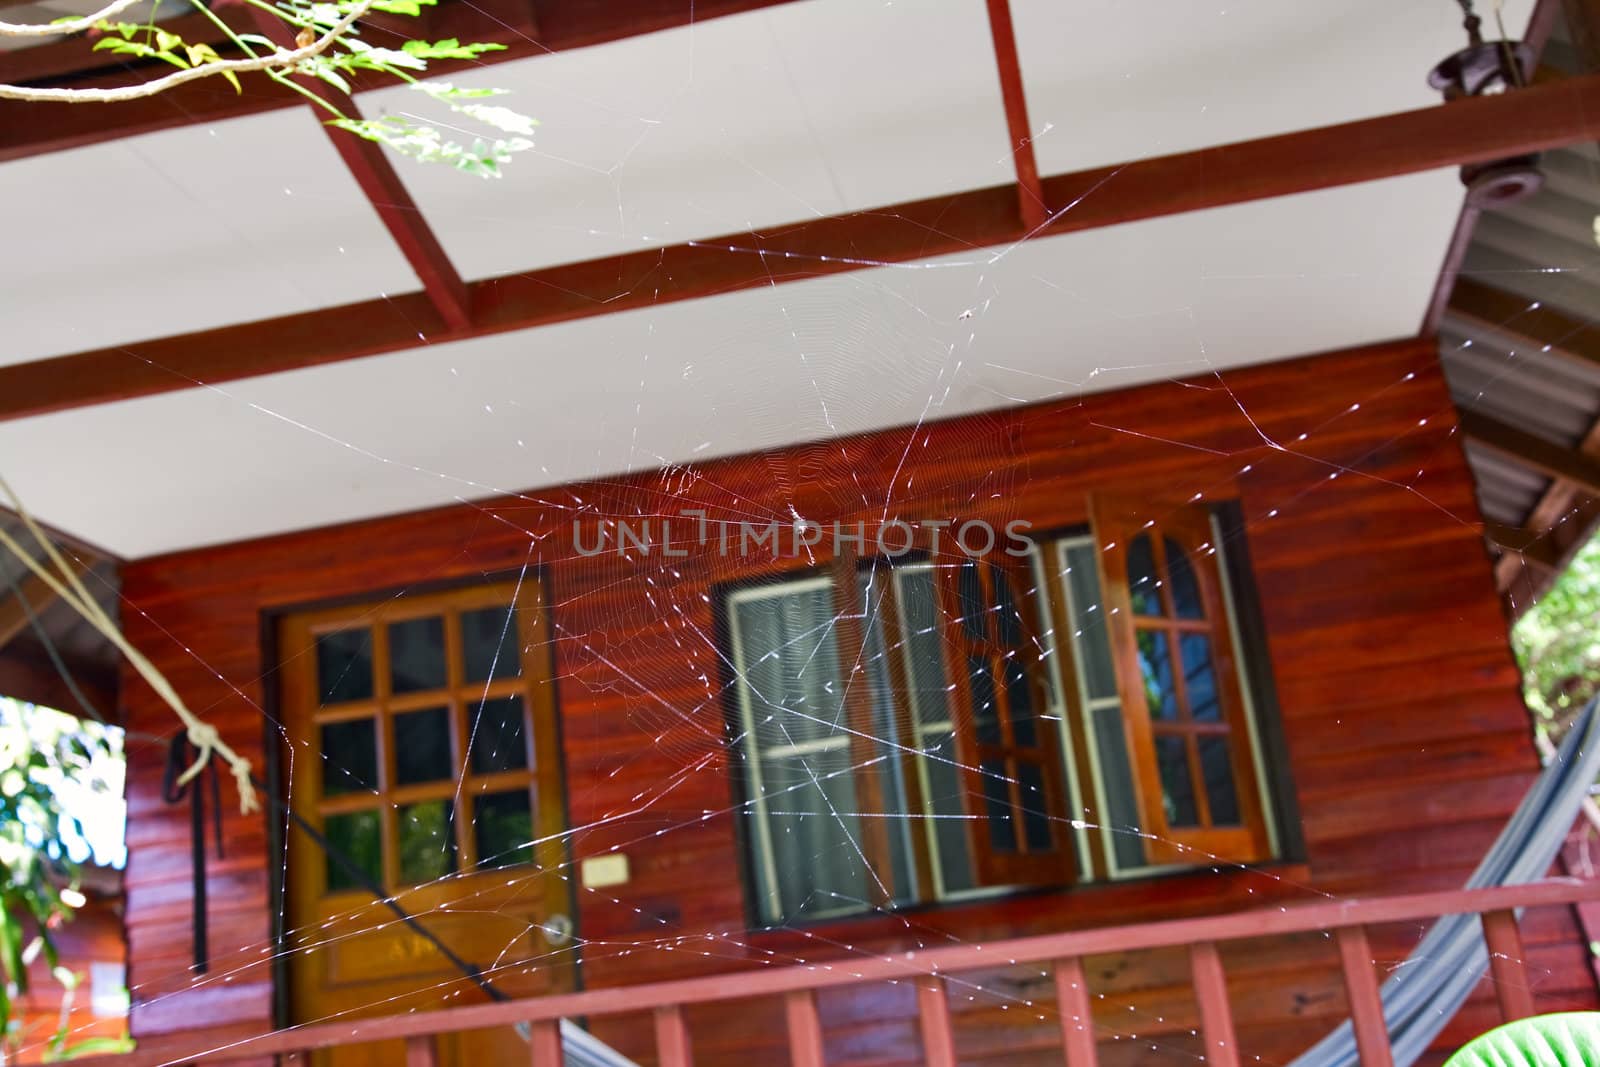 spiderweb against wooden house with windows and door